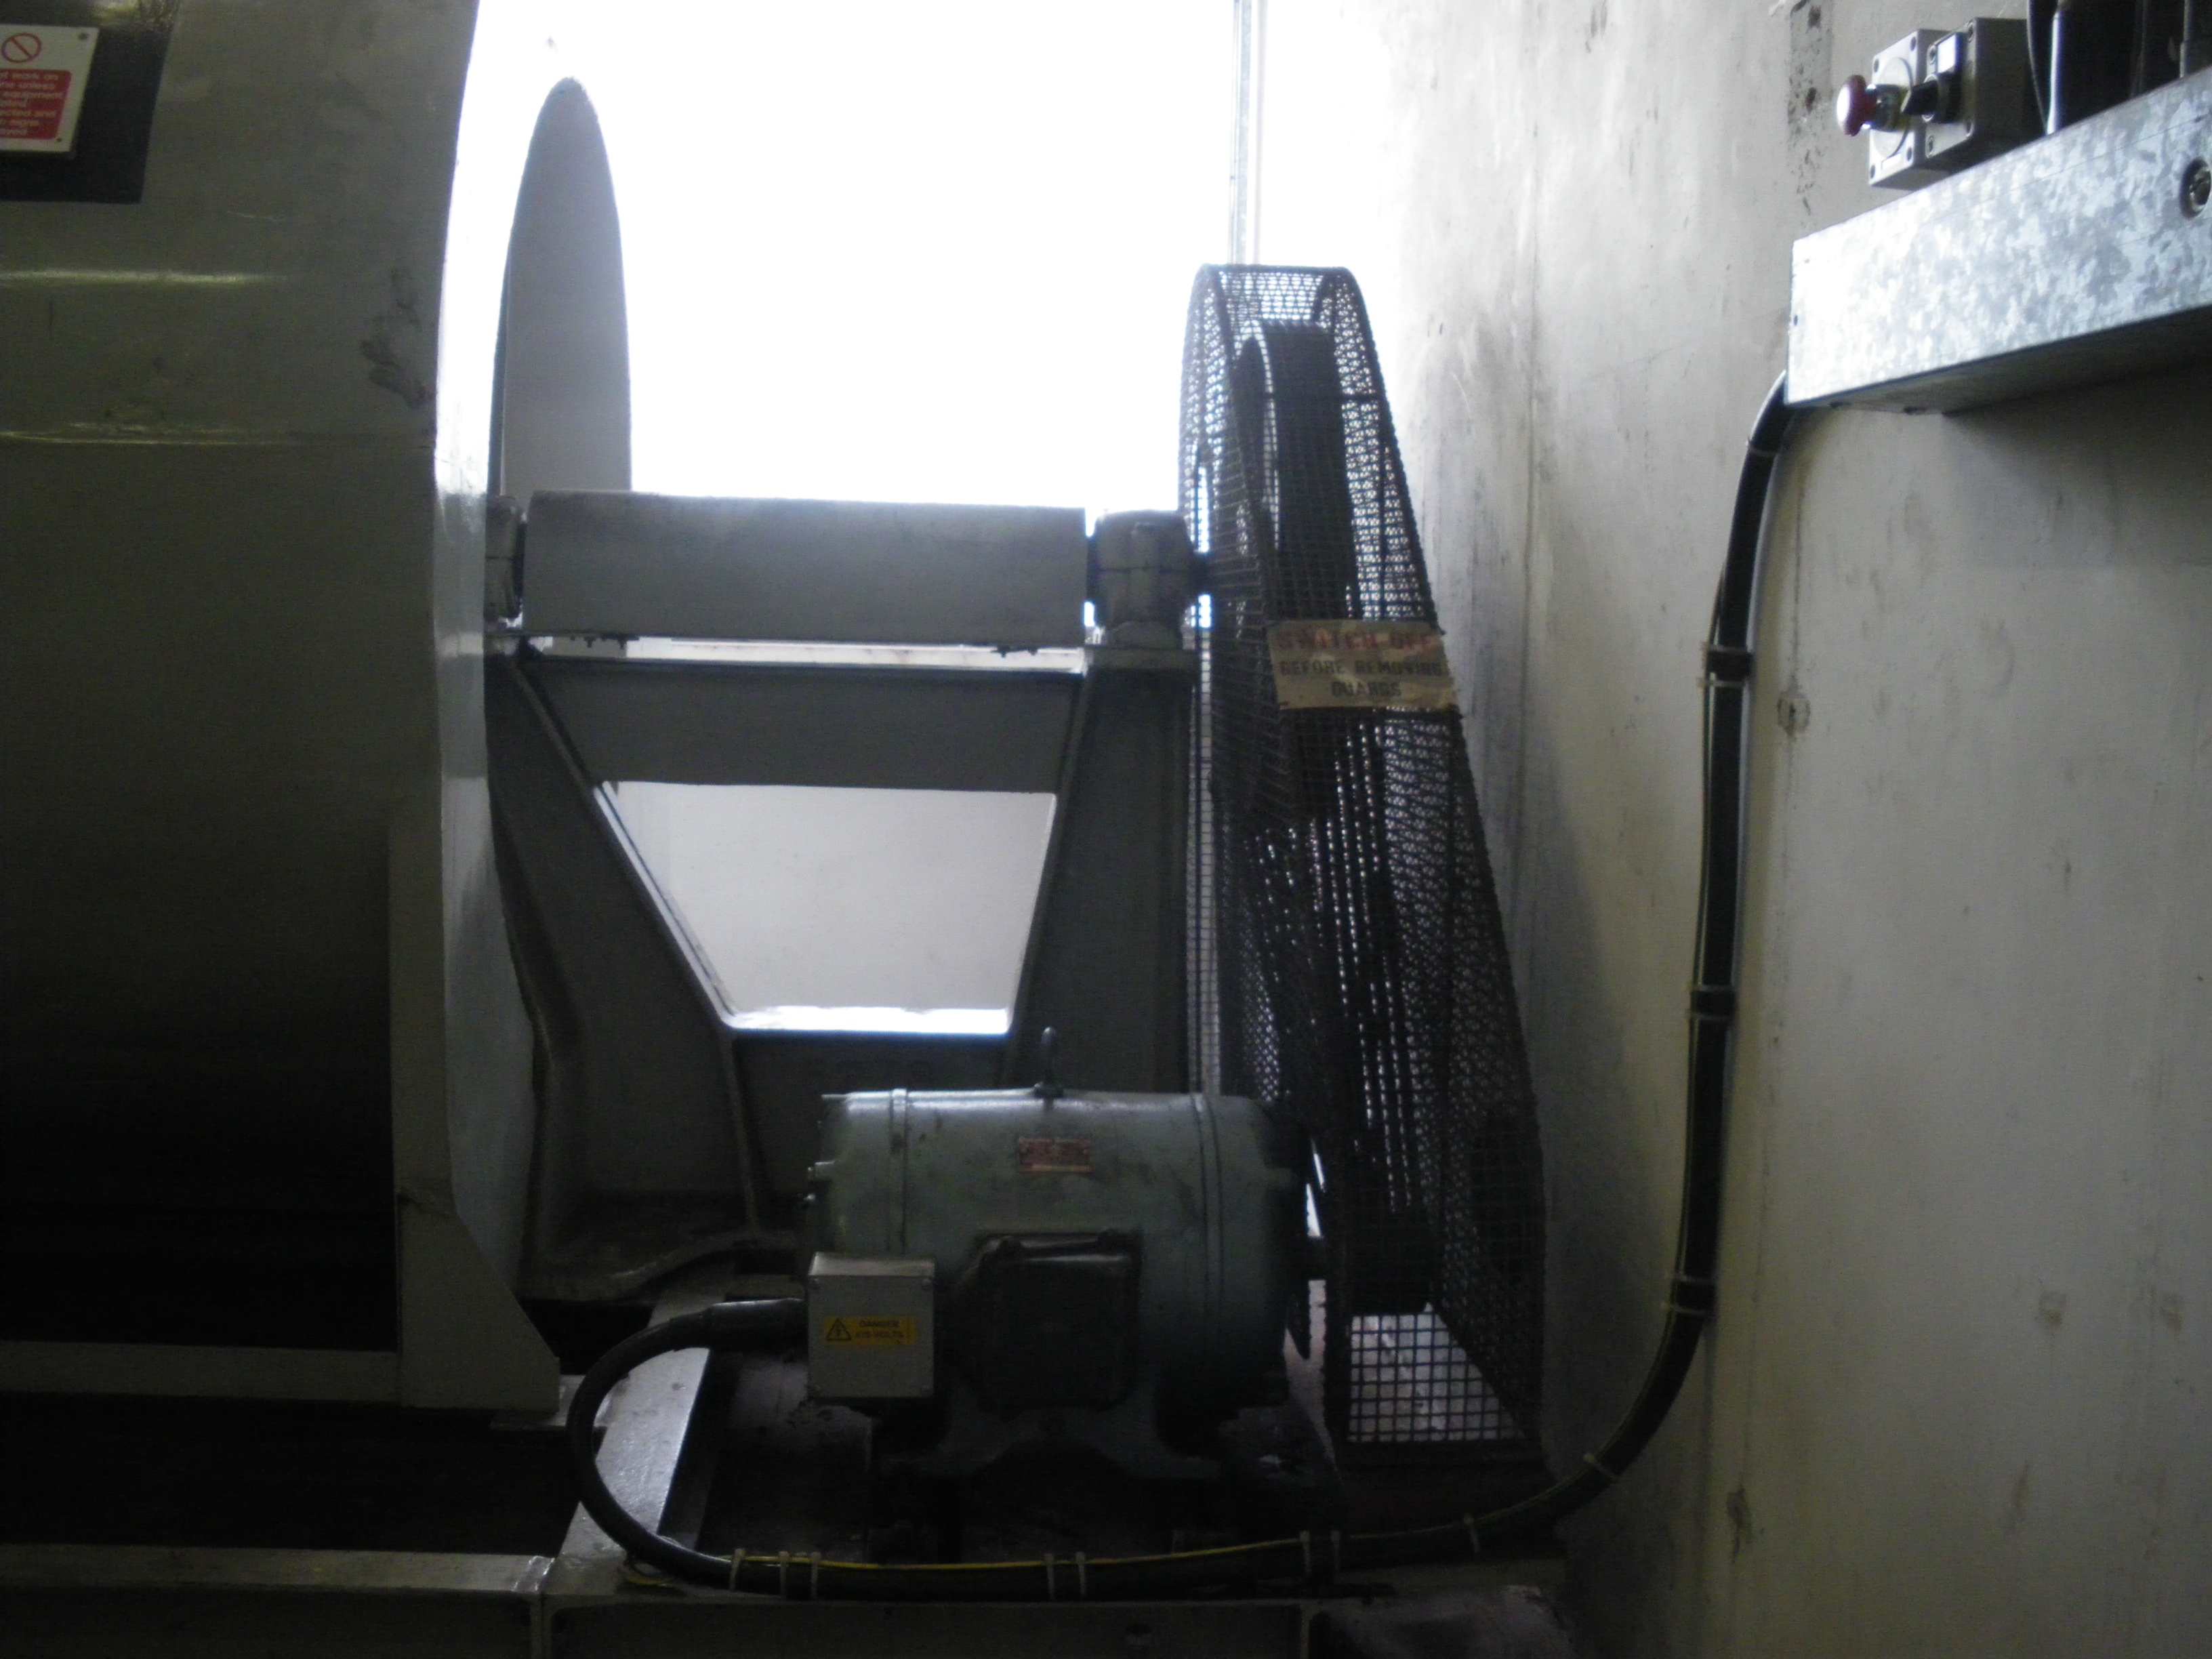 Fan and motor in 3rd floor plant room